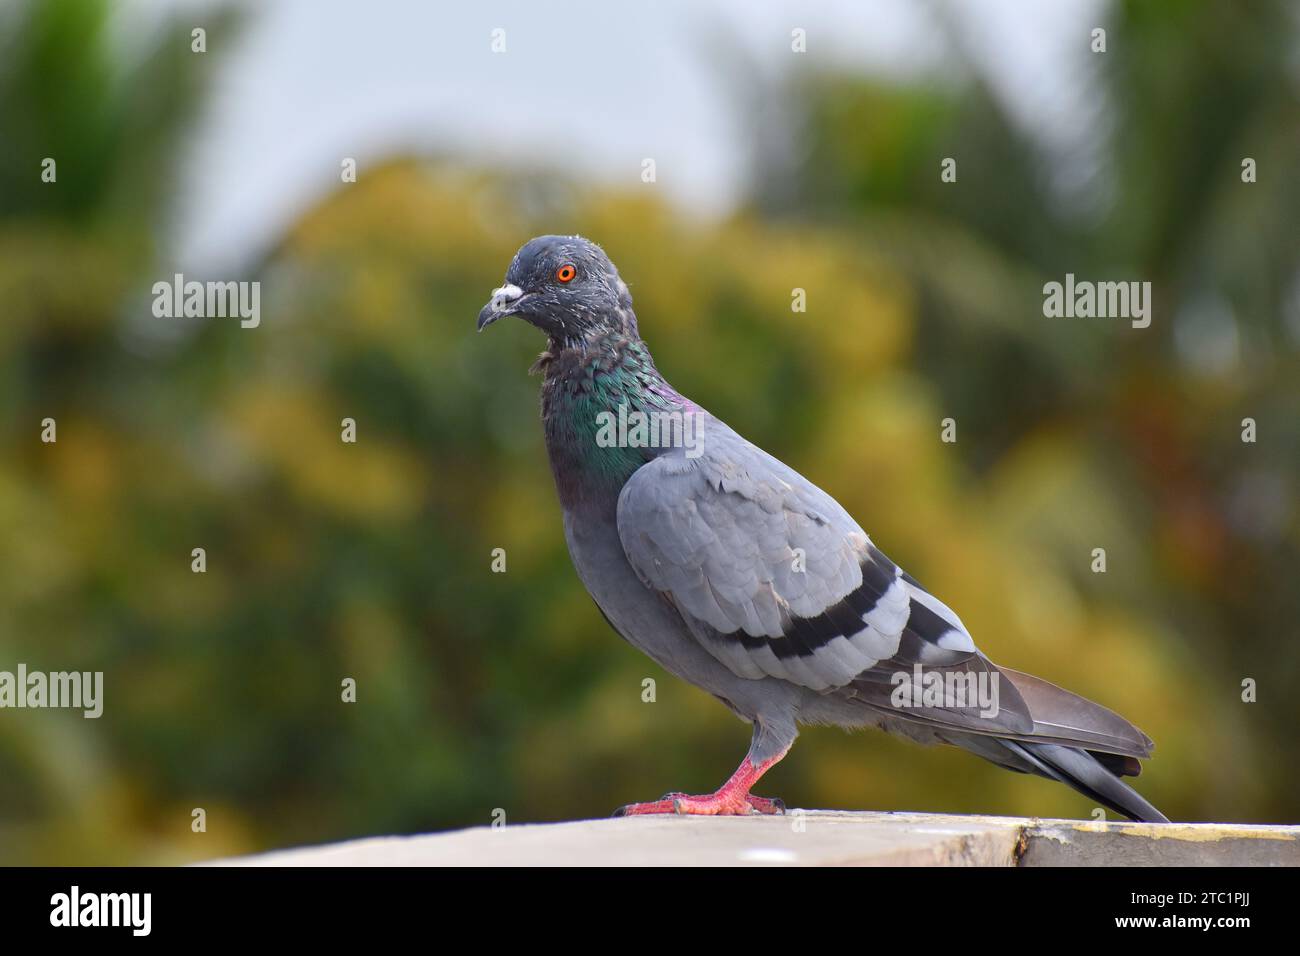 Close up shot of pigeon in urban area Stock Photo